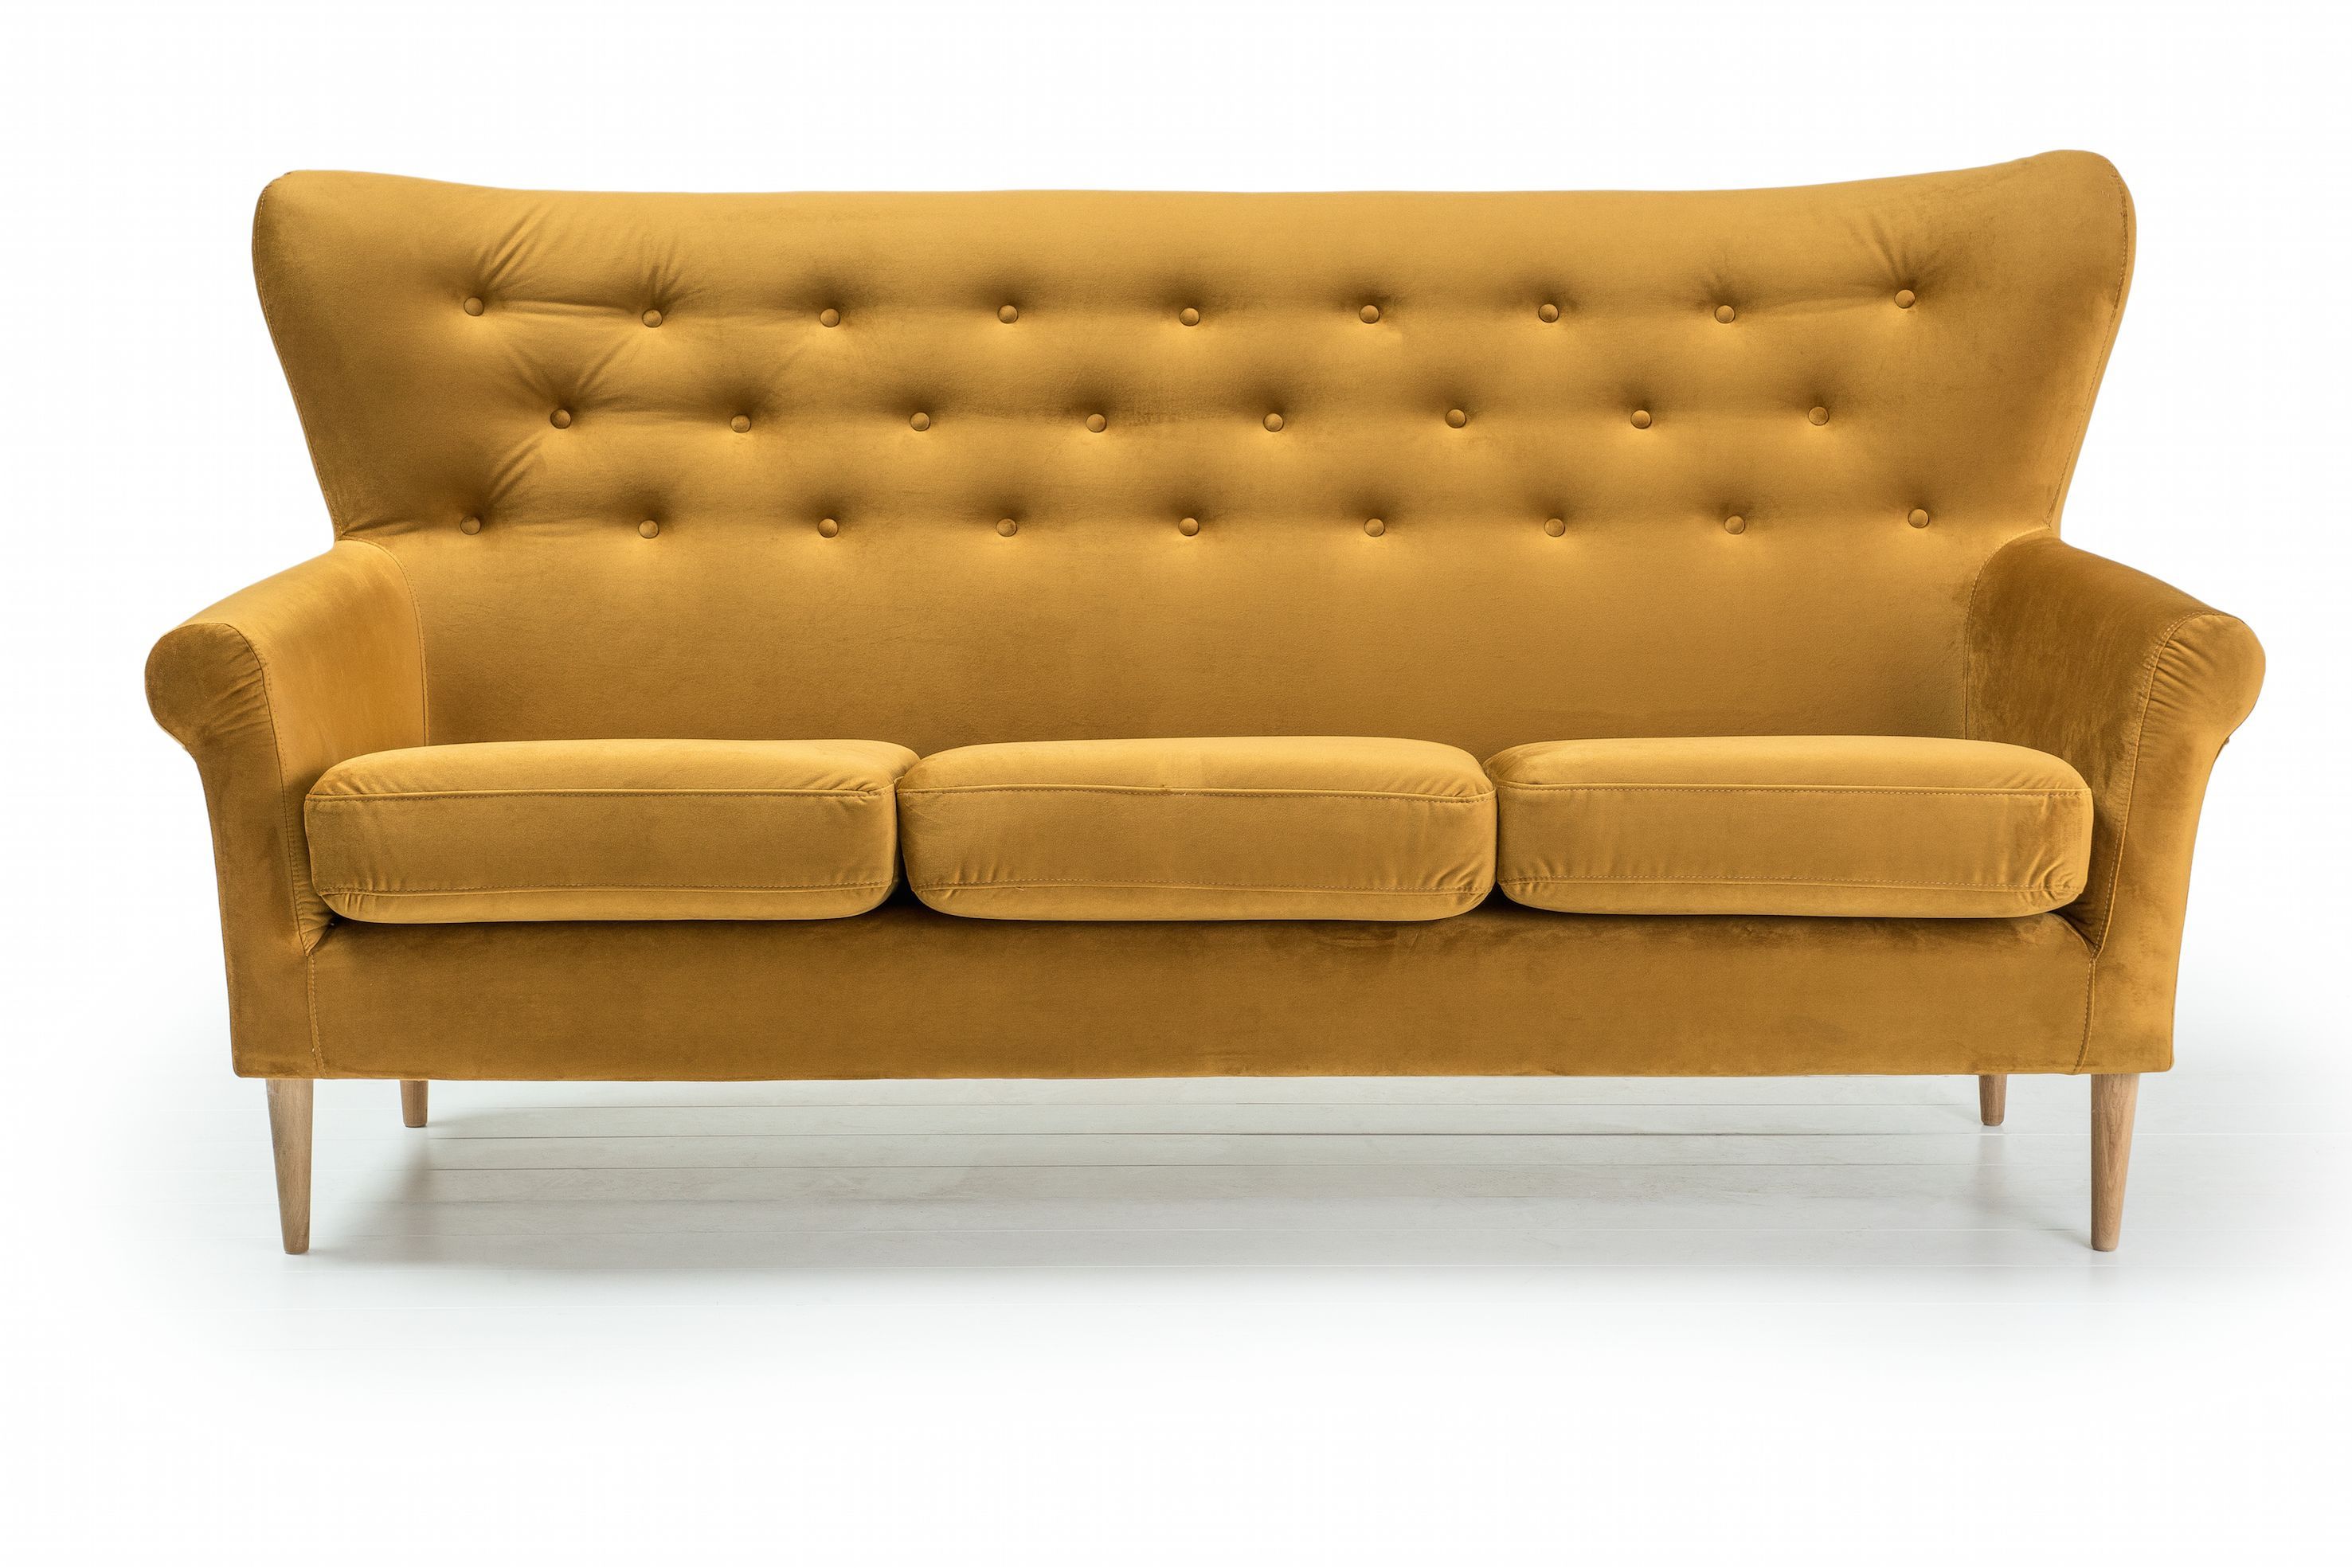 Stylish Modern Sofa With Buttons And The Wing Arms, Perfect For Loft Pertaining To Loft Arm Sofa Chairs (View 9 of 20)